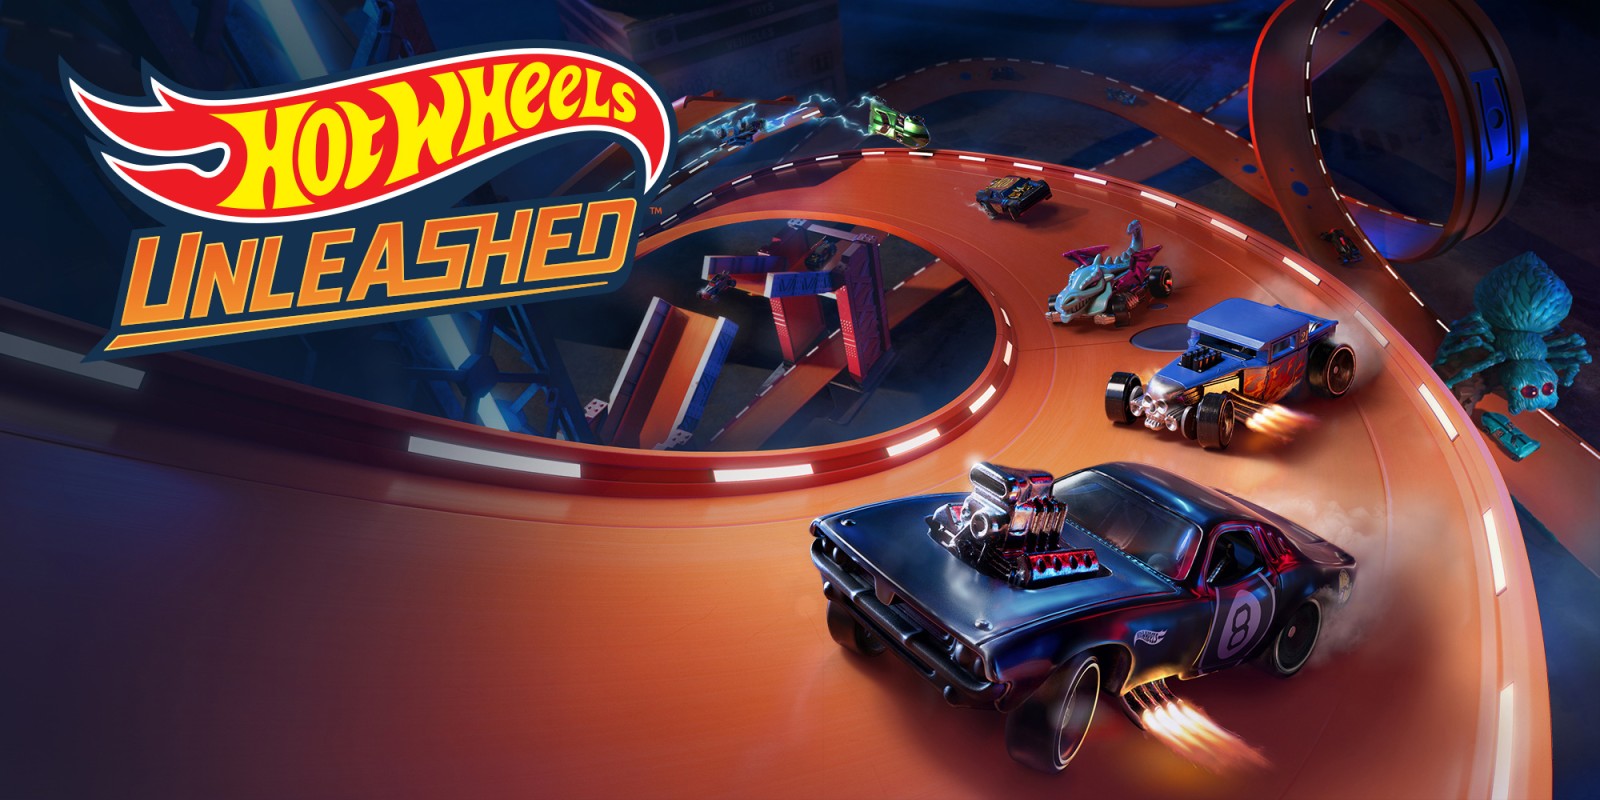 Giovedì il TGTech ti regala Hot Wheels Unleashed per Playstation 4!